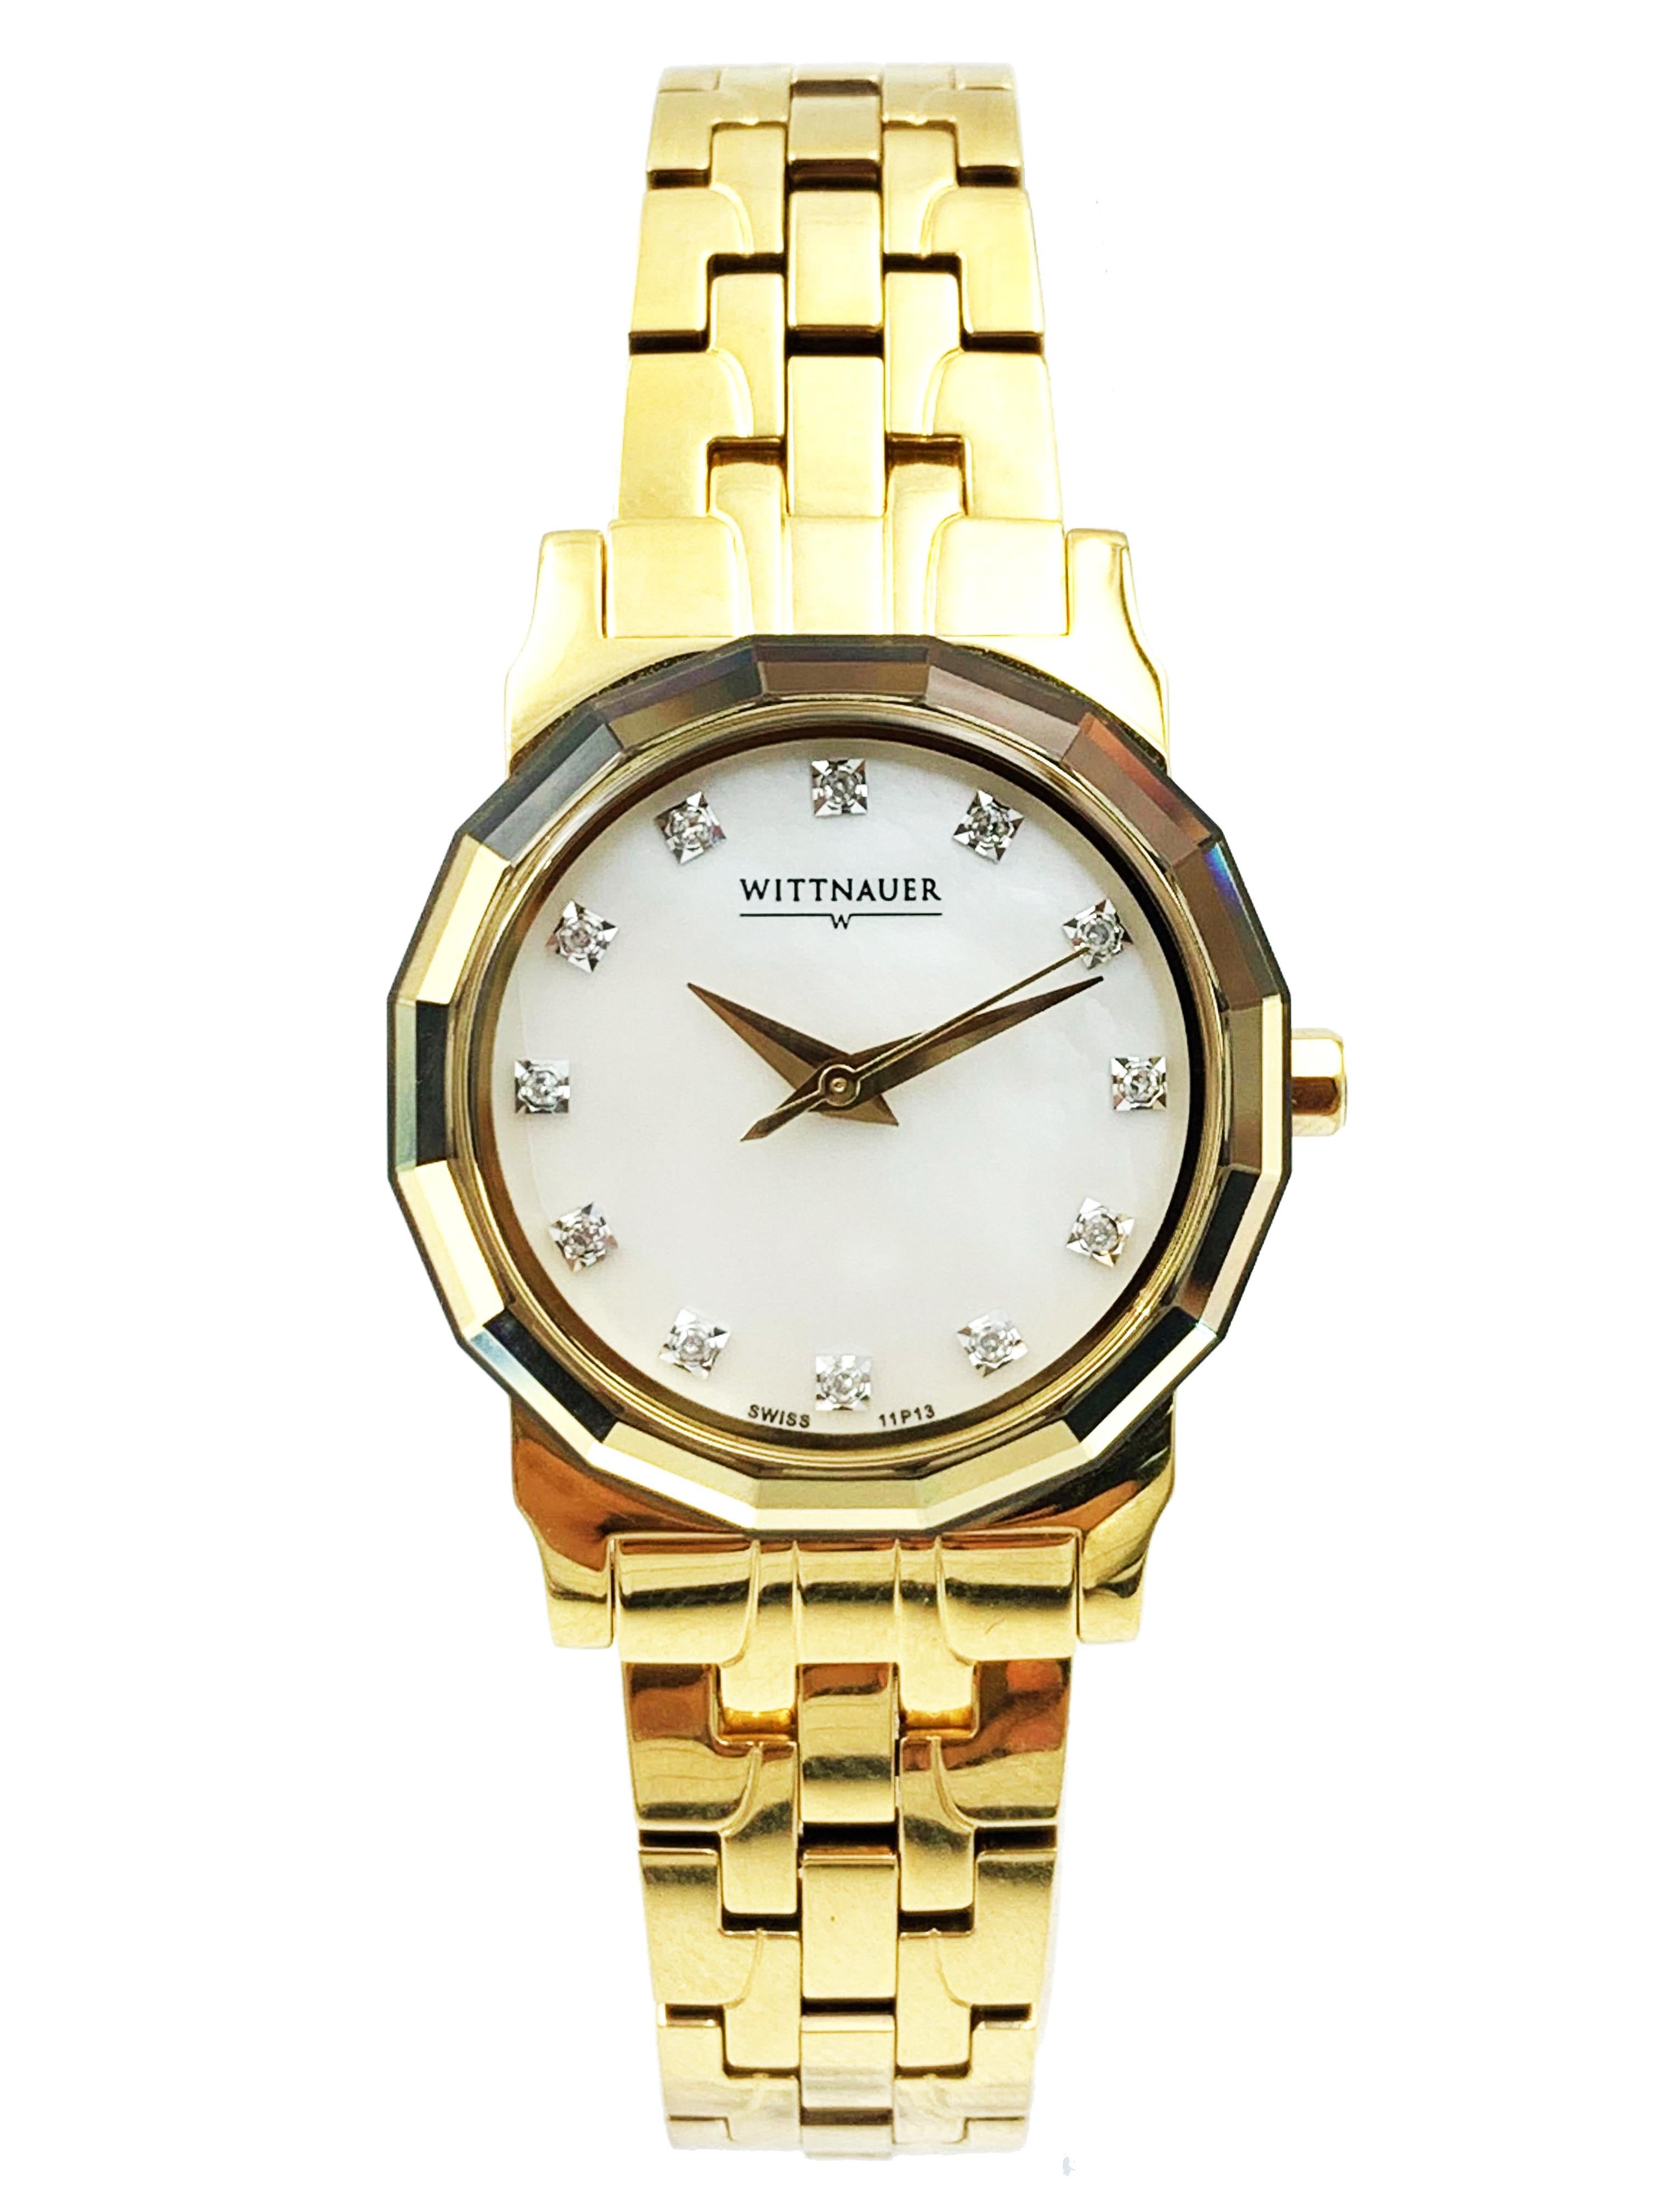 Pre-owned Wittnauer Winter Garden Gold-Tone Steel MOP Diamond Dial Ladies Watch 11P13. Minor scratches on back case of the watch. blemishes on case and on band. This Beautiful Timepiece is Powered by a Quartz (Battery) Movement and Features: